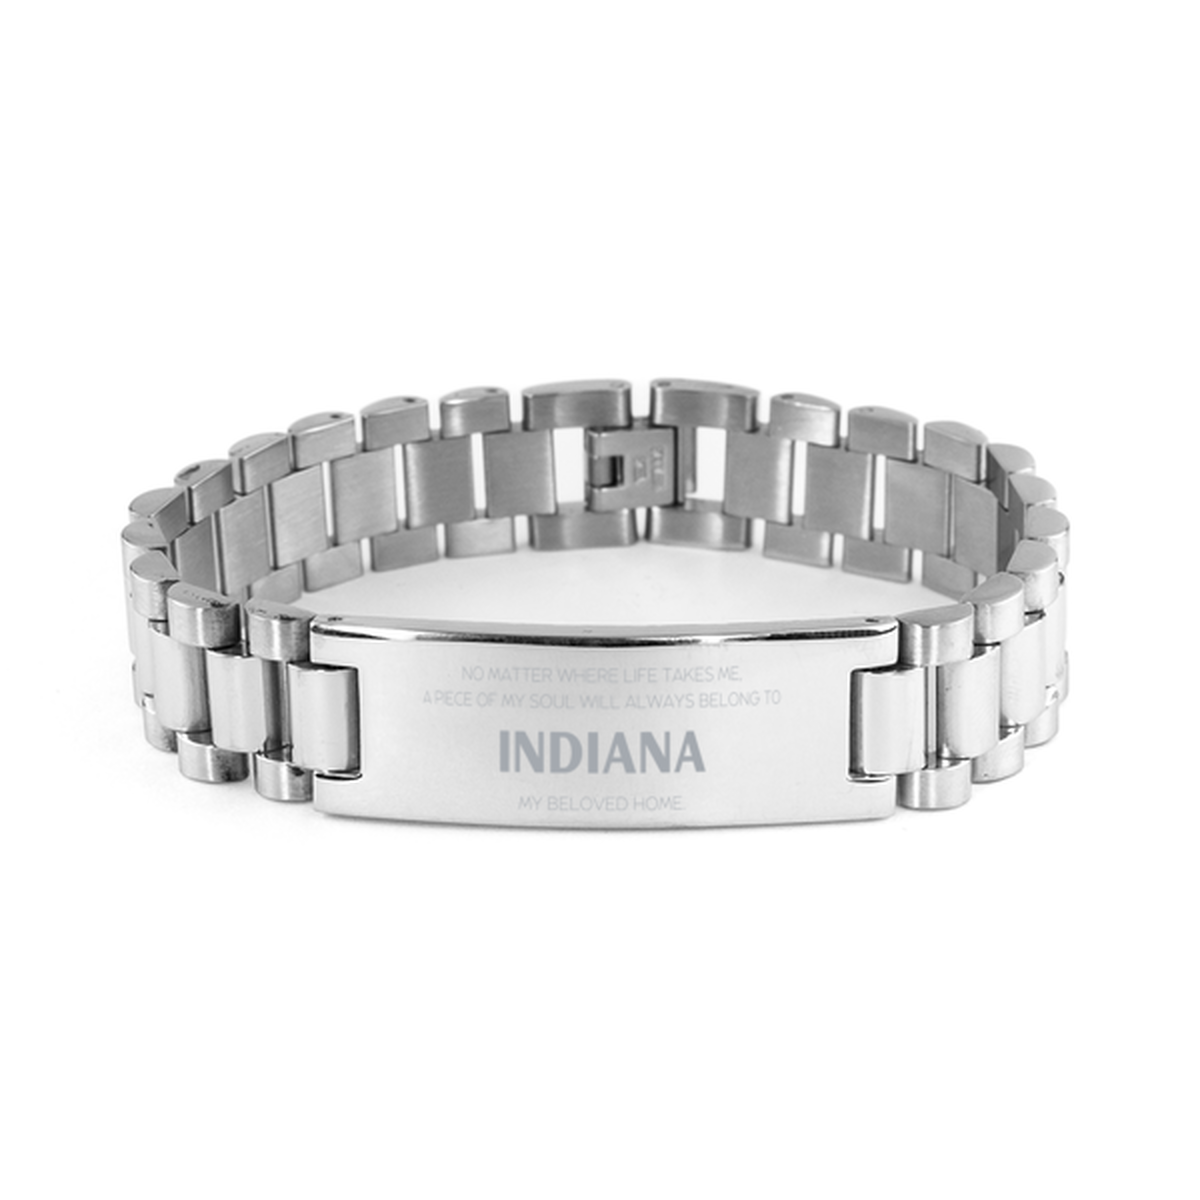 Love Indiana State Gifts, My soul will always belong to Indiana, Proud Ladder Stainless Steel Bracelet, Birthday Unique Gifts For Indiana Men, Women, Friends